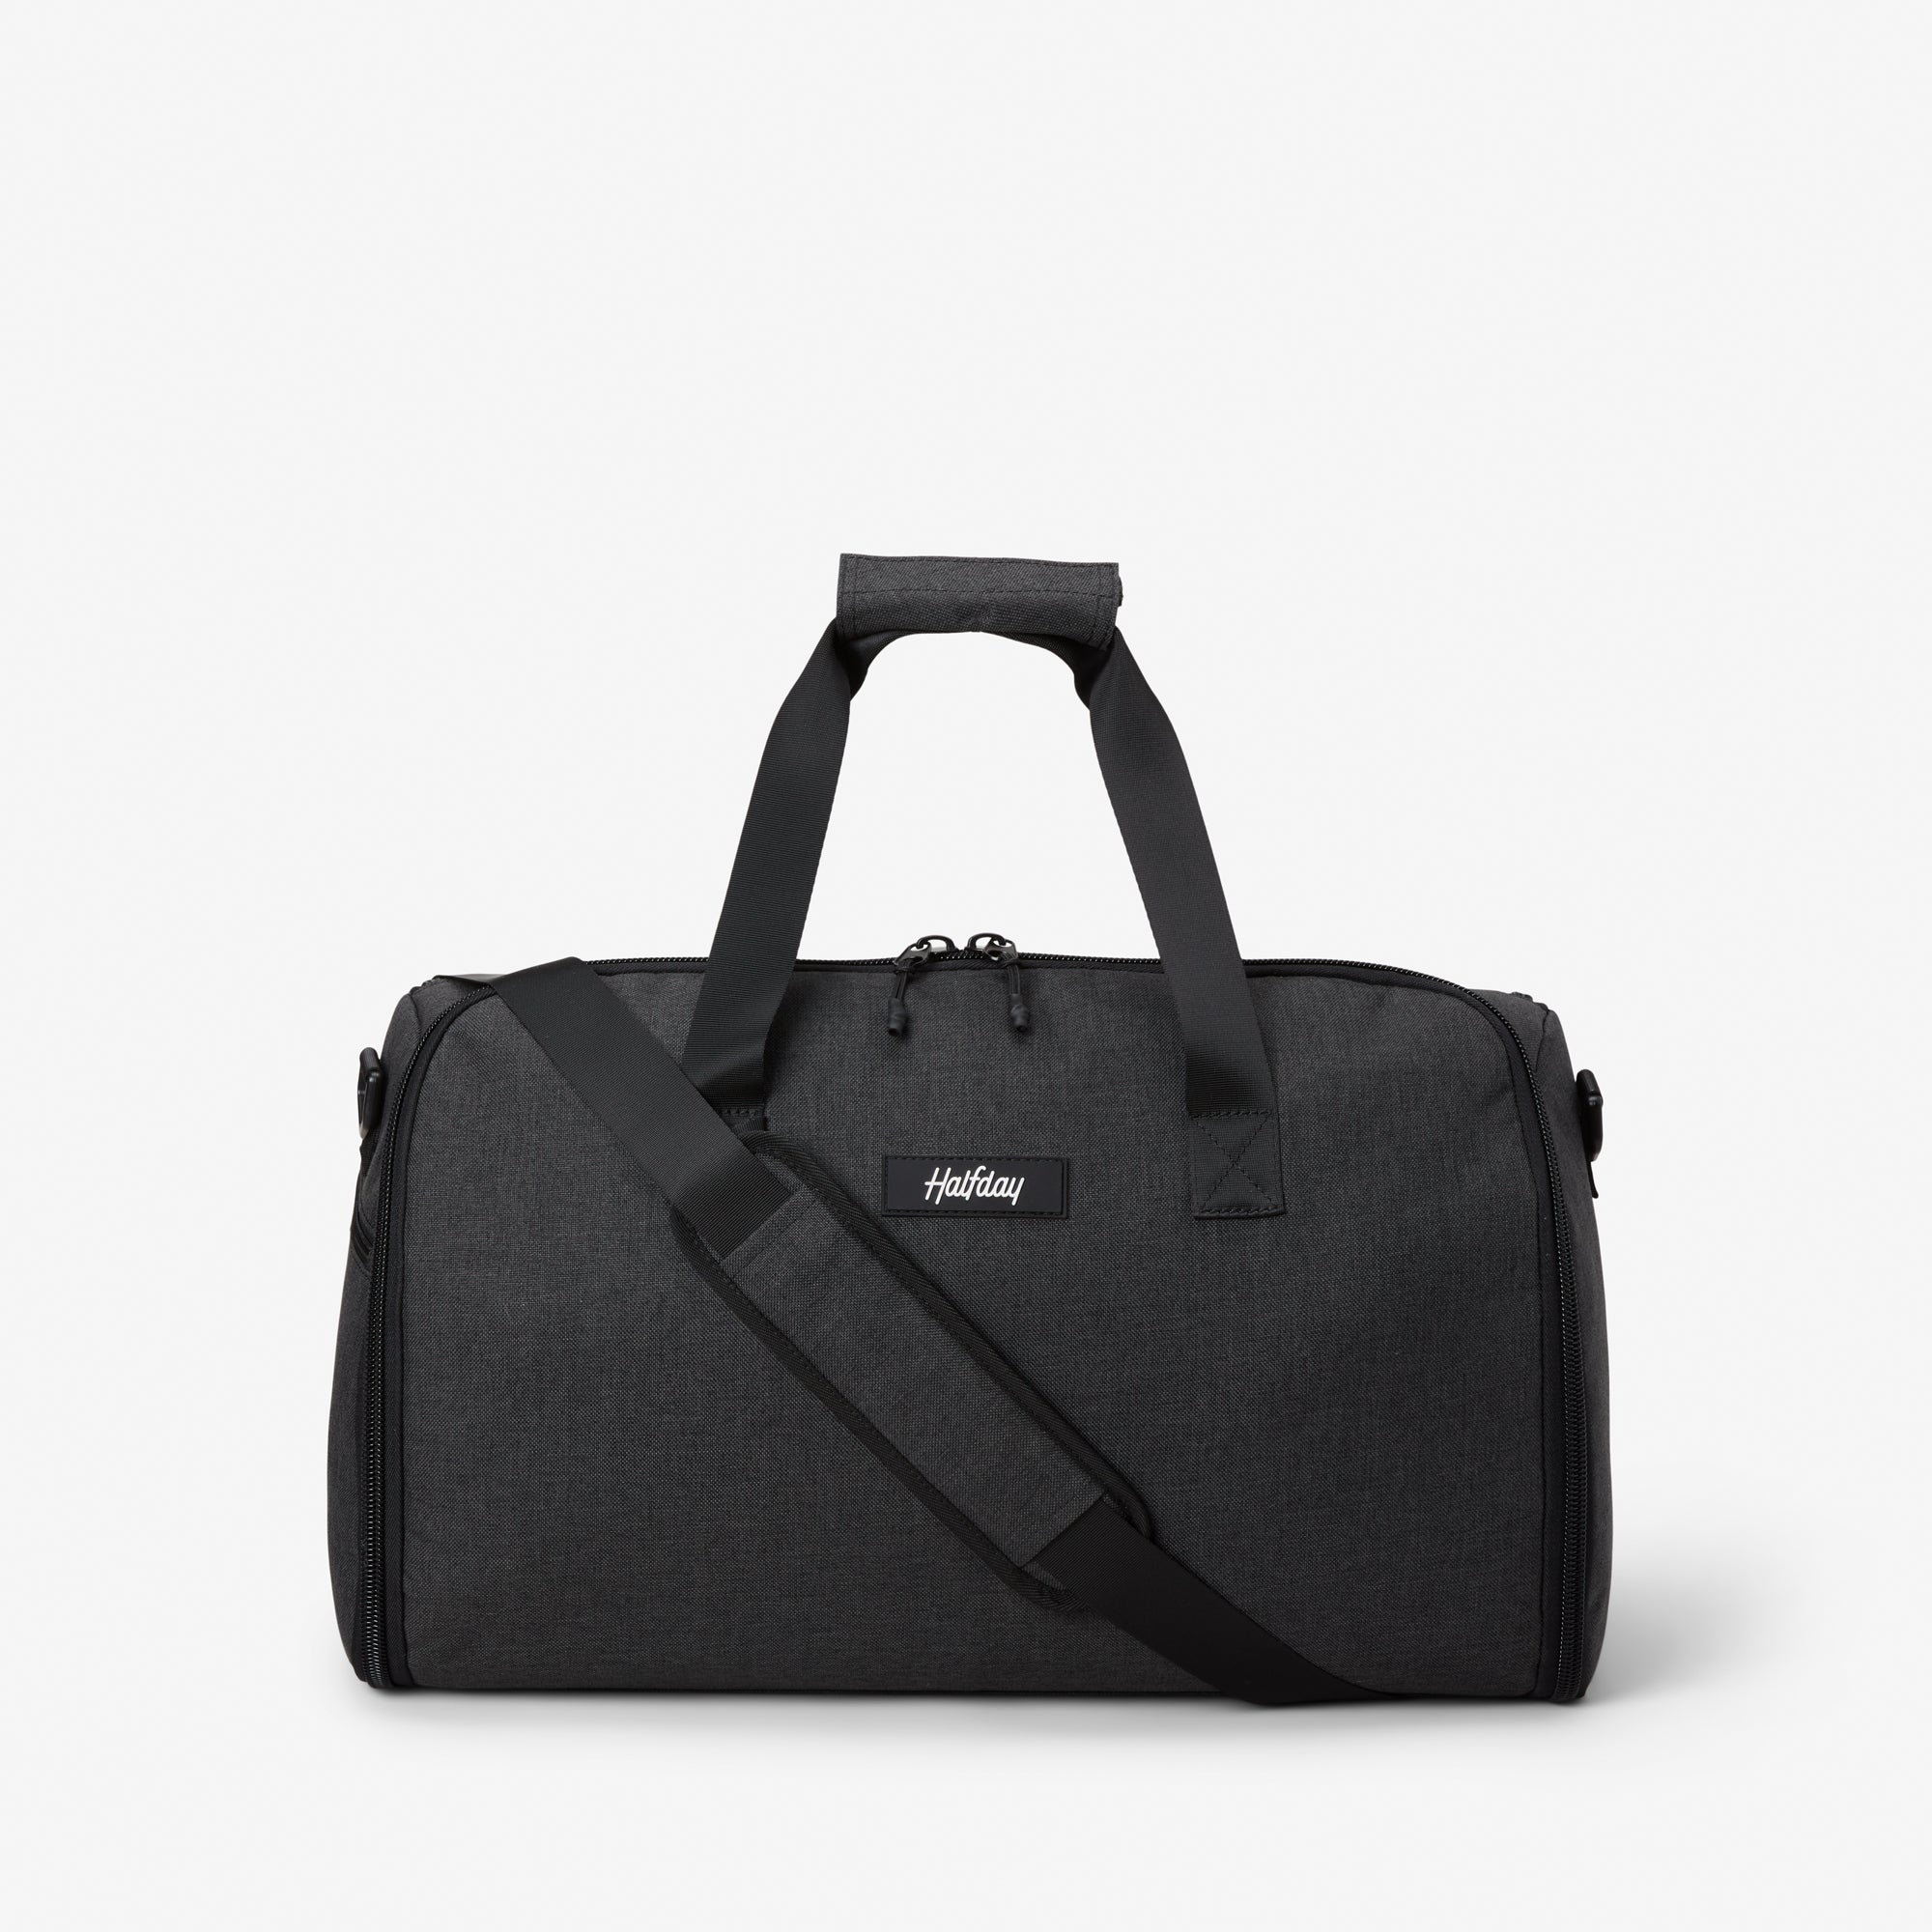 The Garment The Garment Duffel - Color Shadow - Size Compact